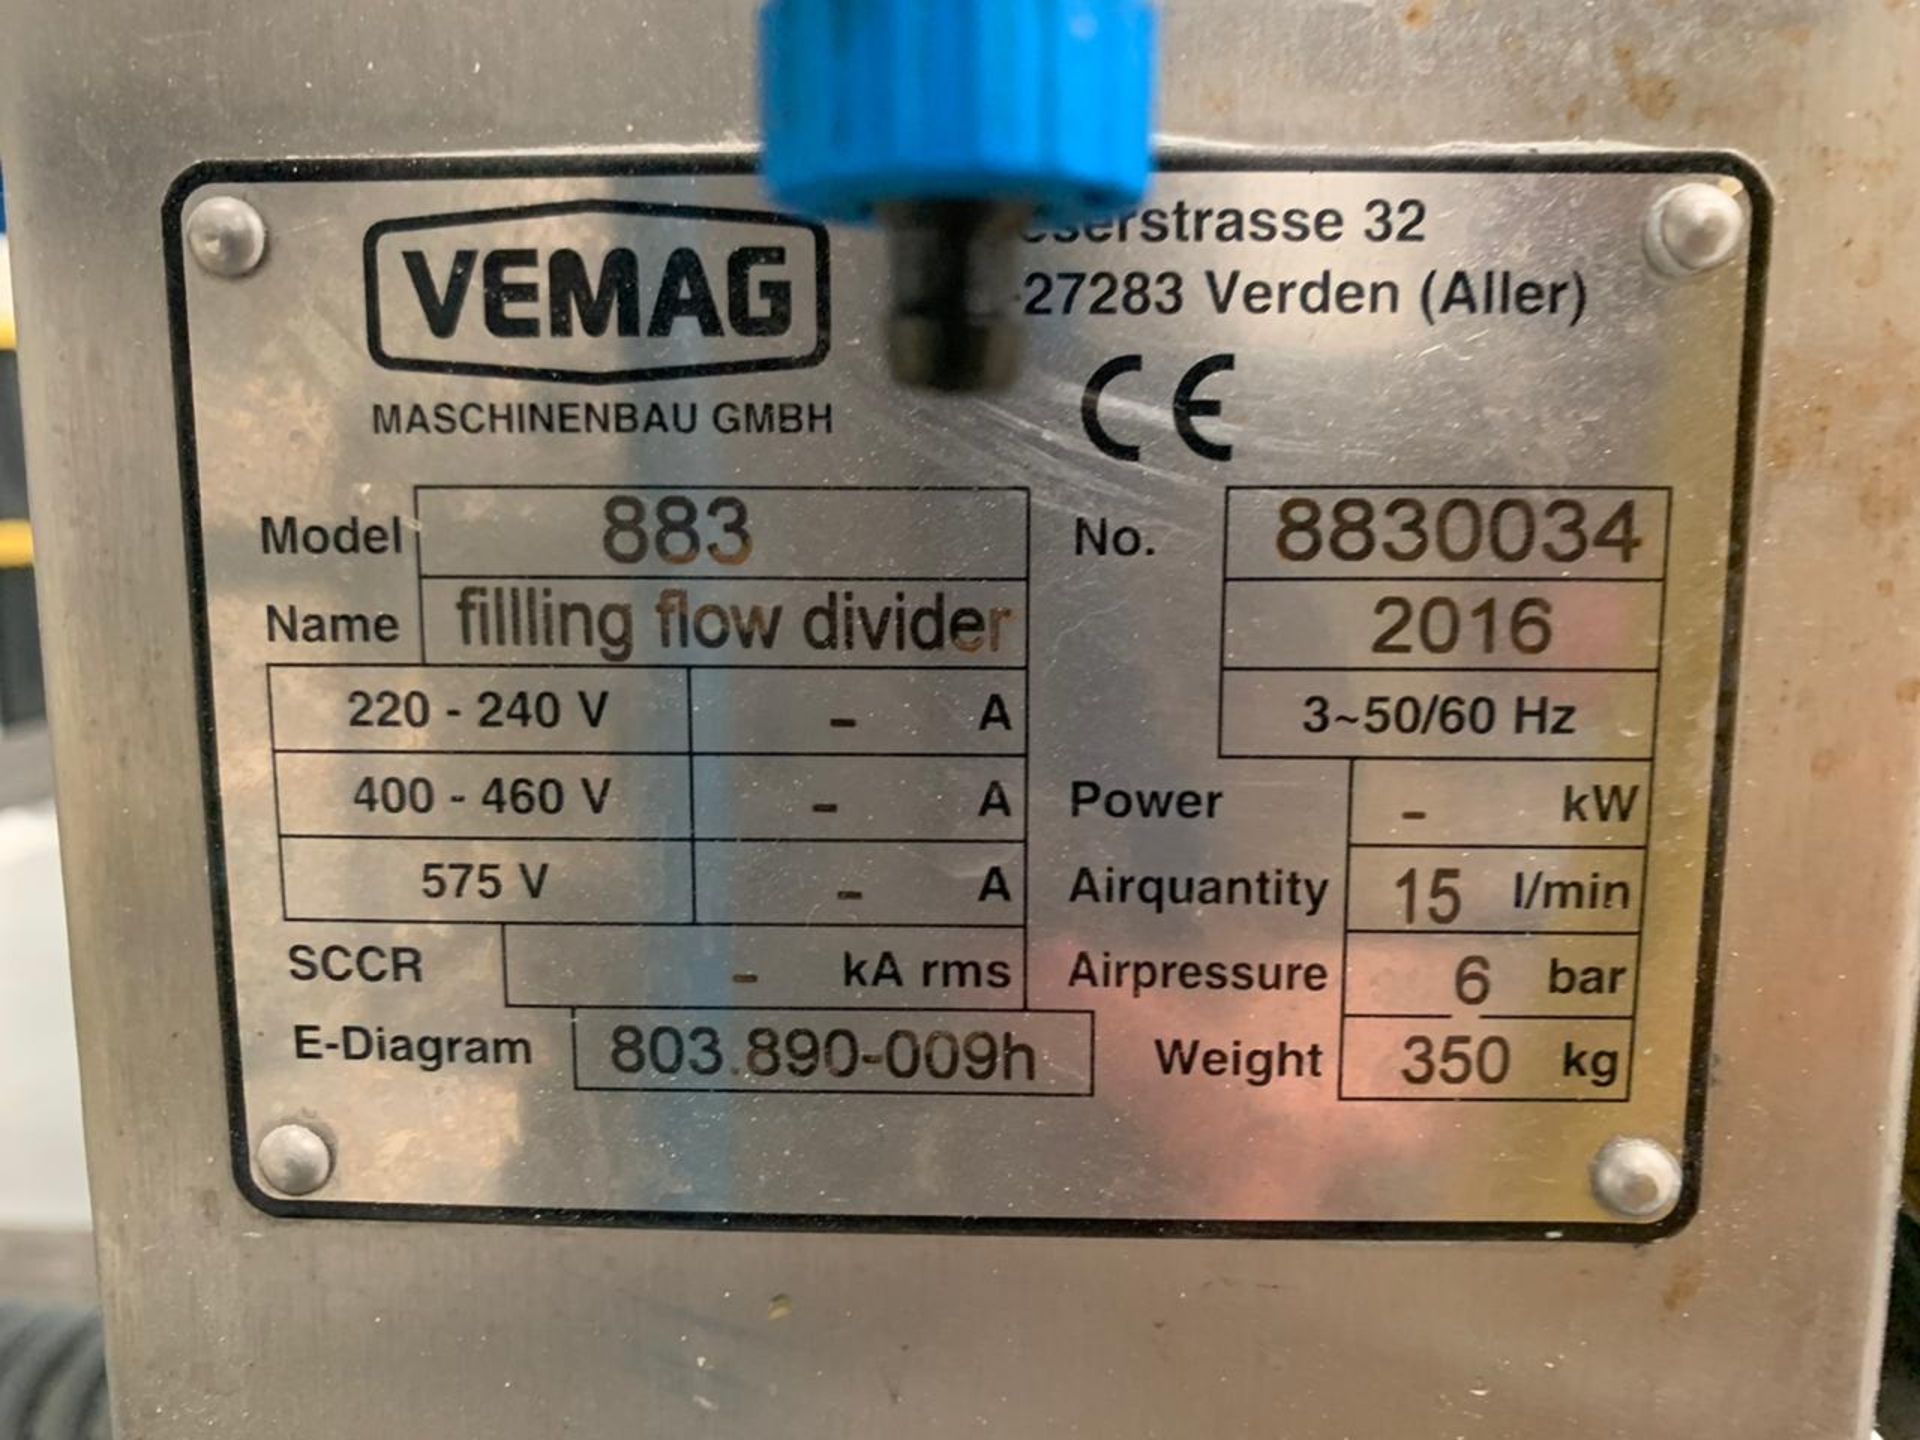 Vemag Robot 500 Pneumatic Dispenser SN 1284993, with PLC Model PC878 - Image 29 of 37